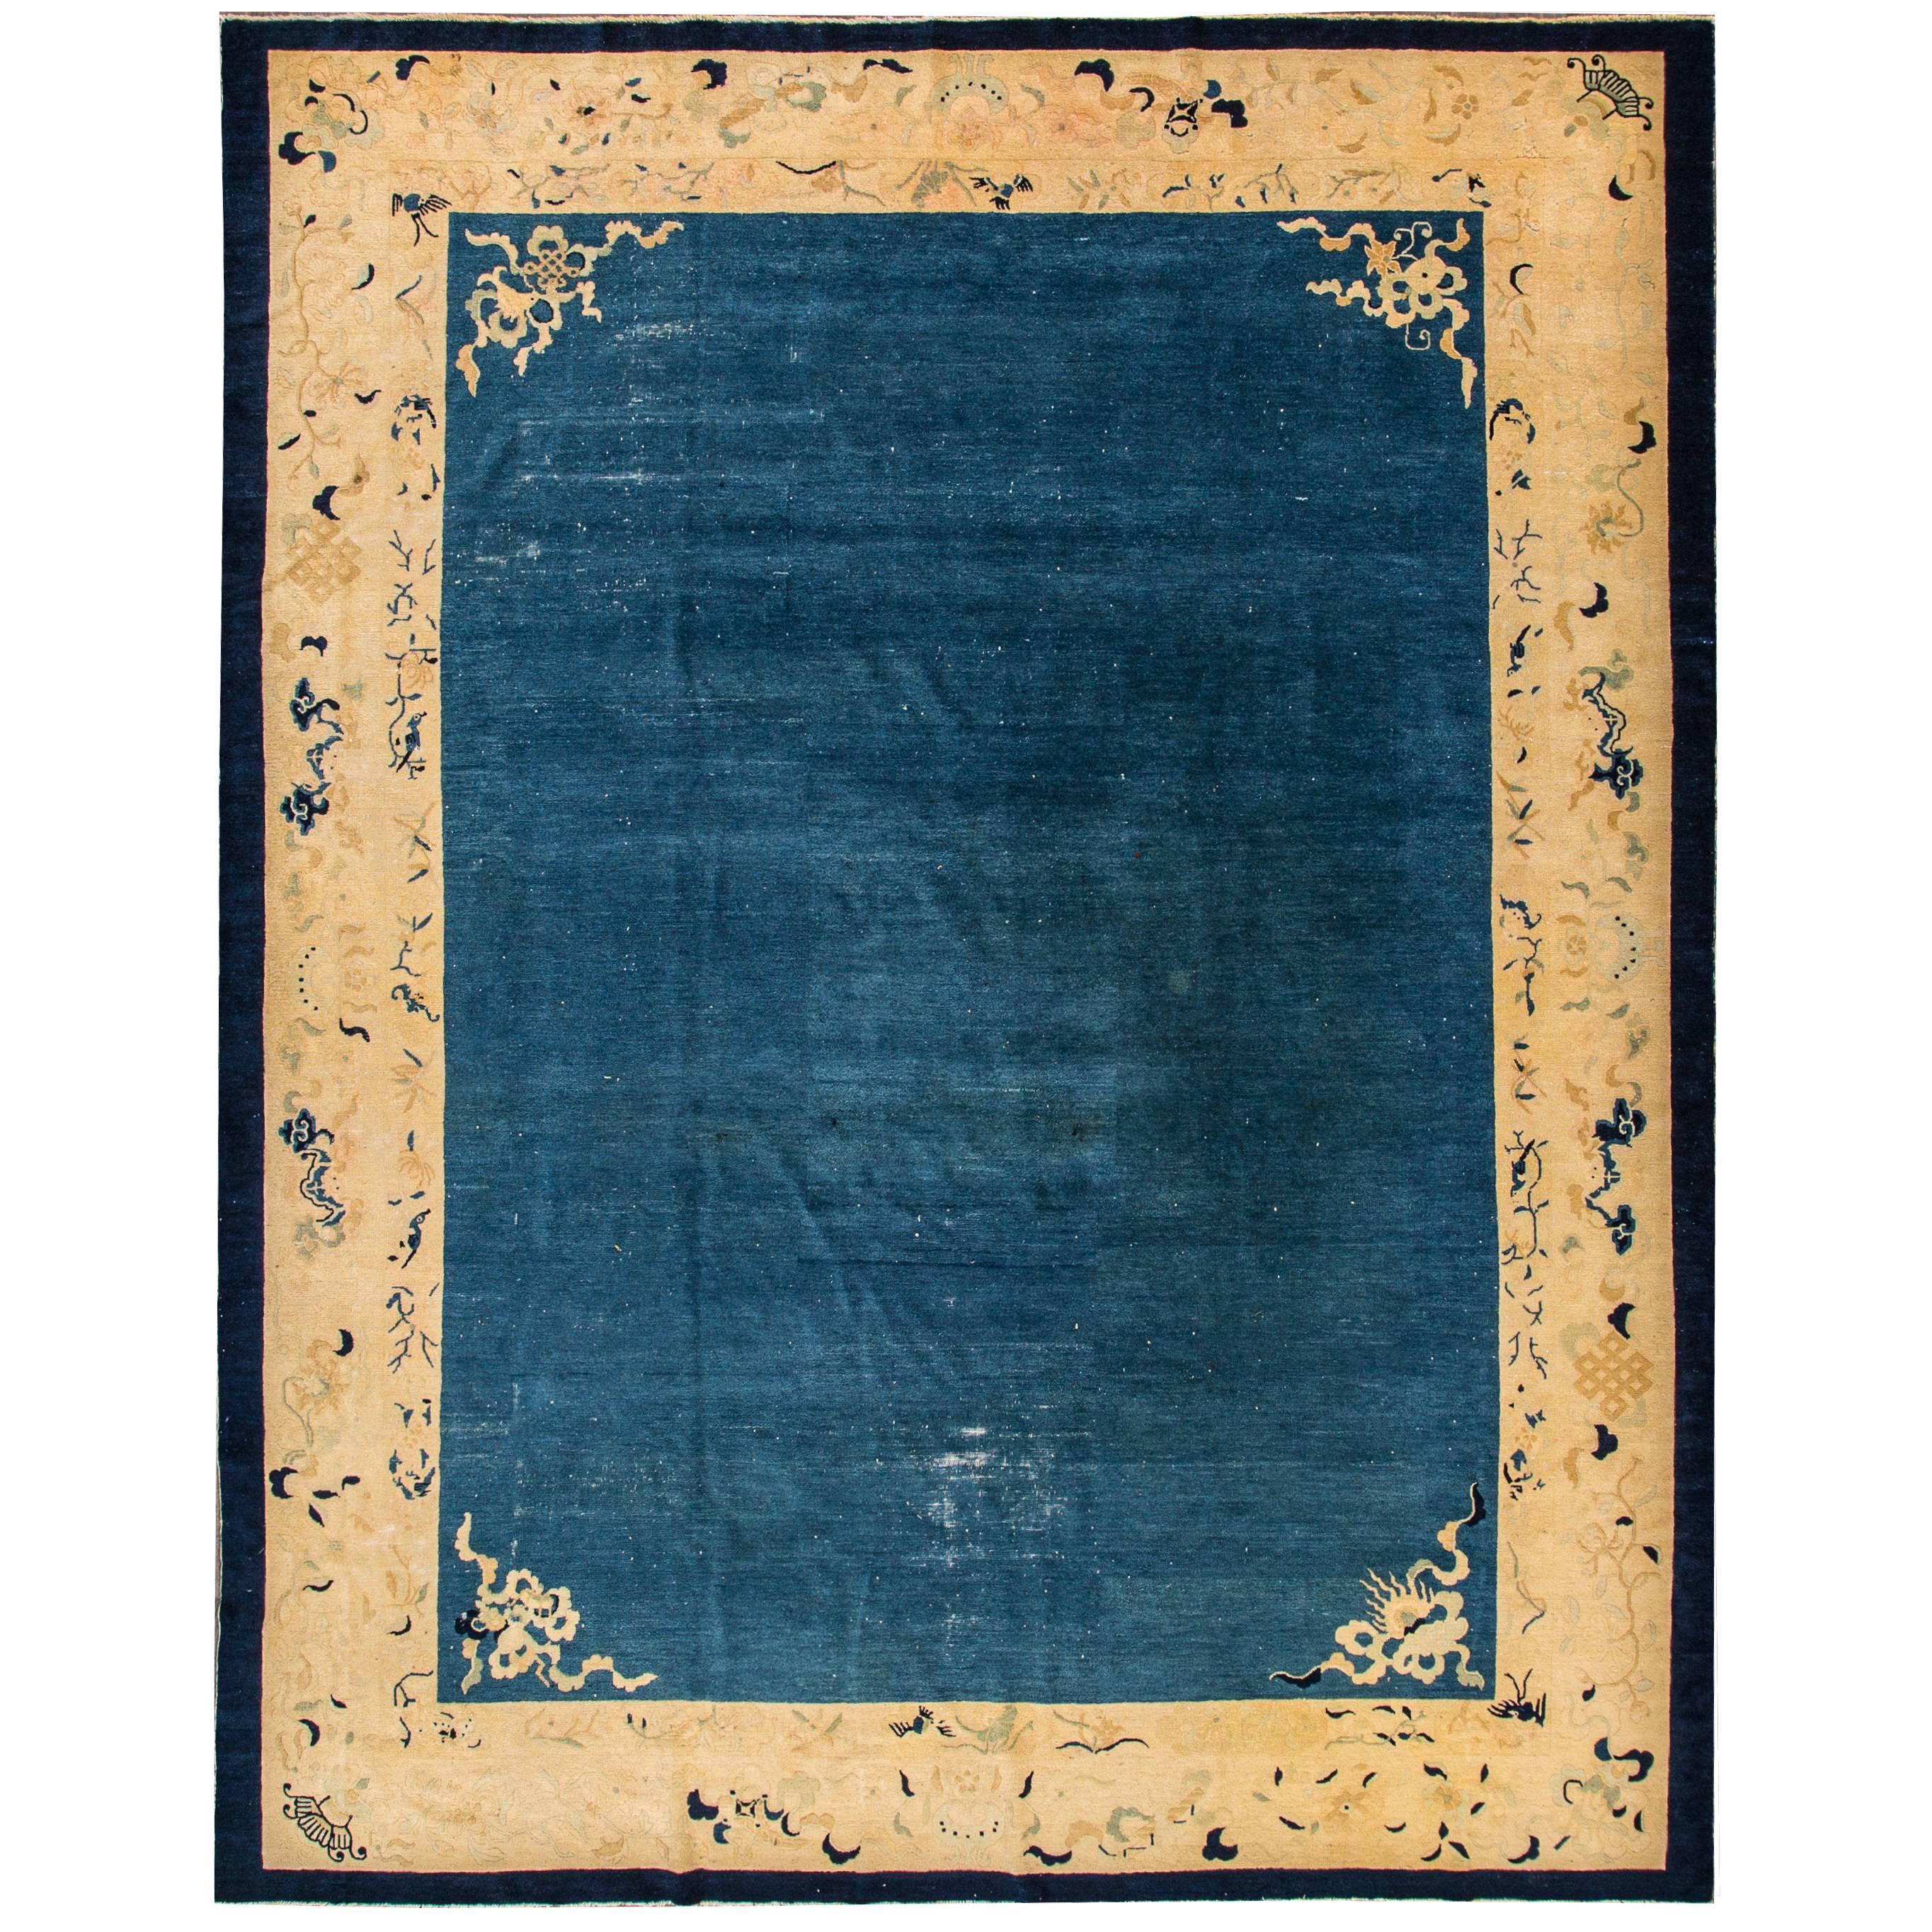 Early 20th  century Antique Blue Chinese Peking wool Rug 